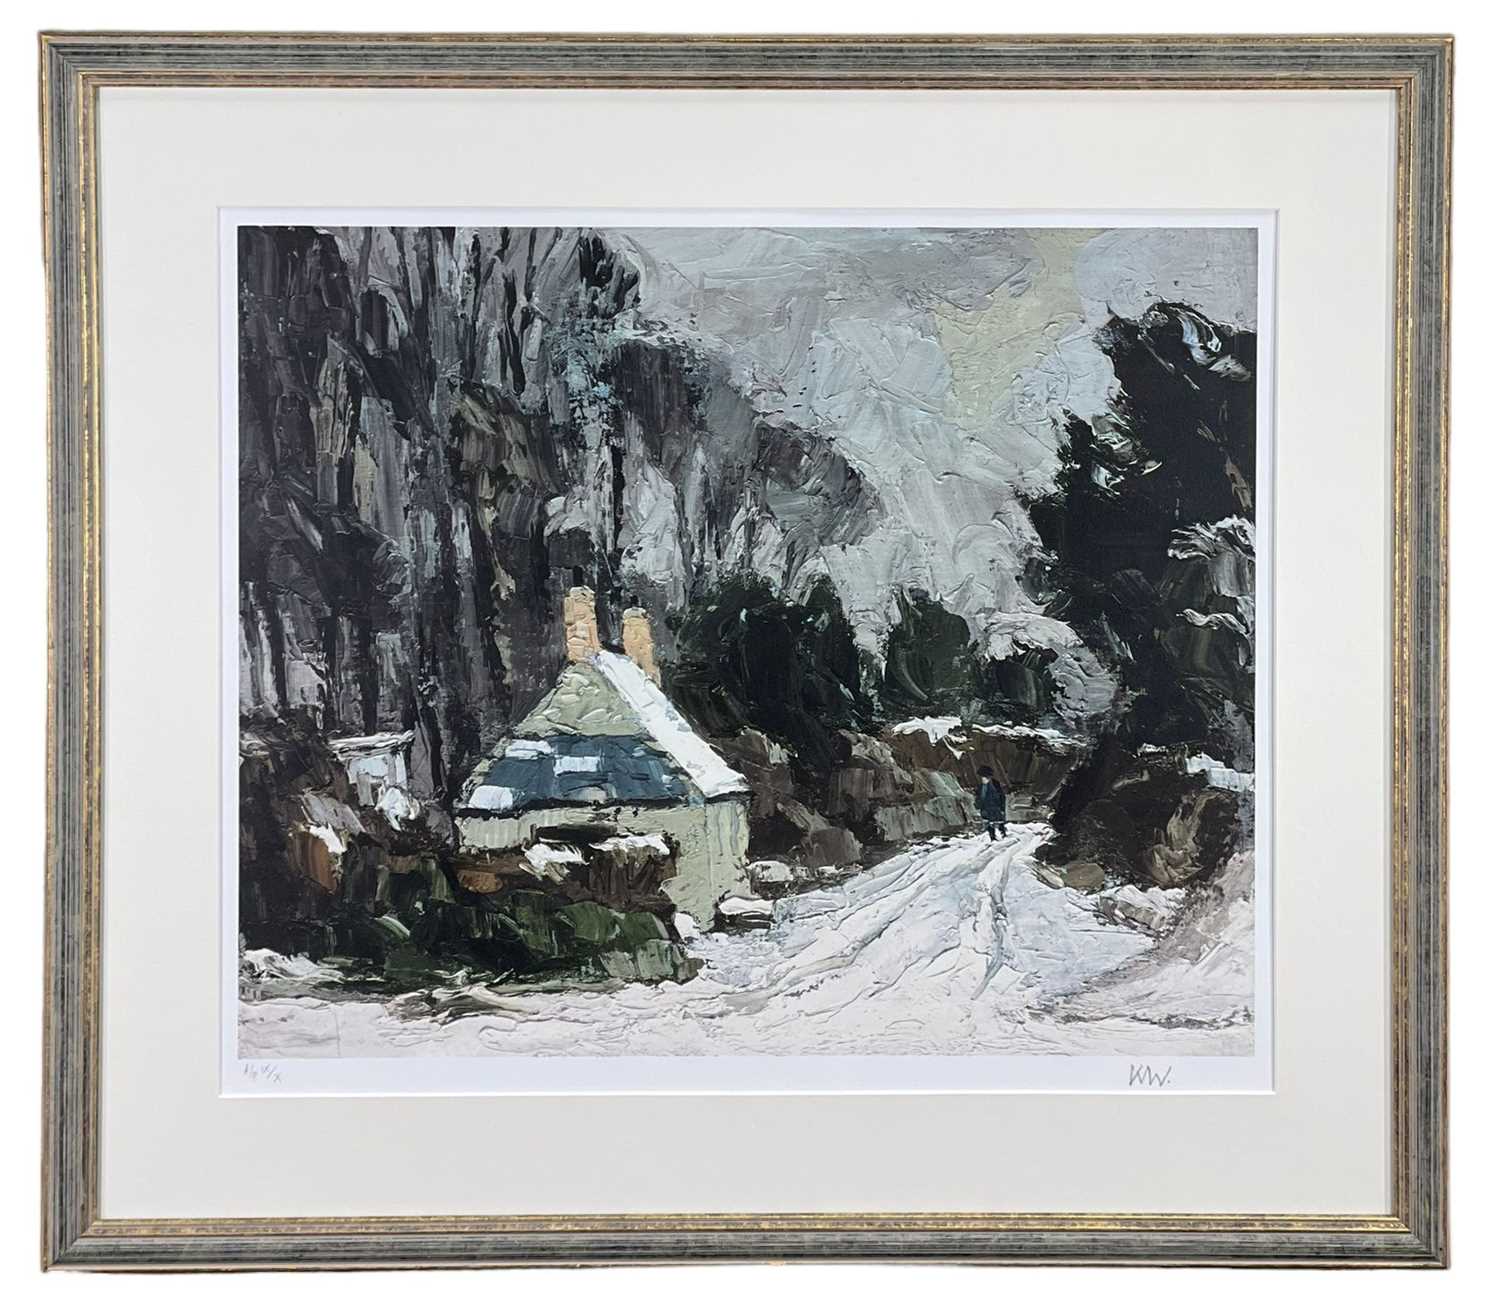 ‡ SIR KYFFIN WILLIAMS RA numbered artist's proof print - winter scene with cottage and figure, - Image 2 of 2